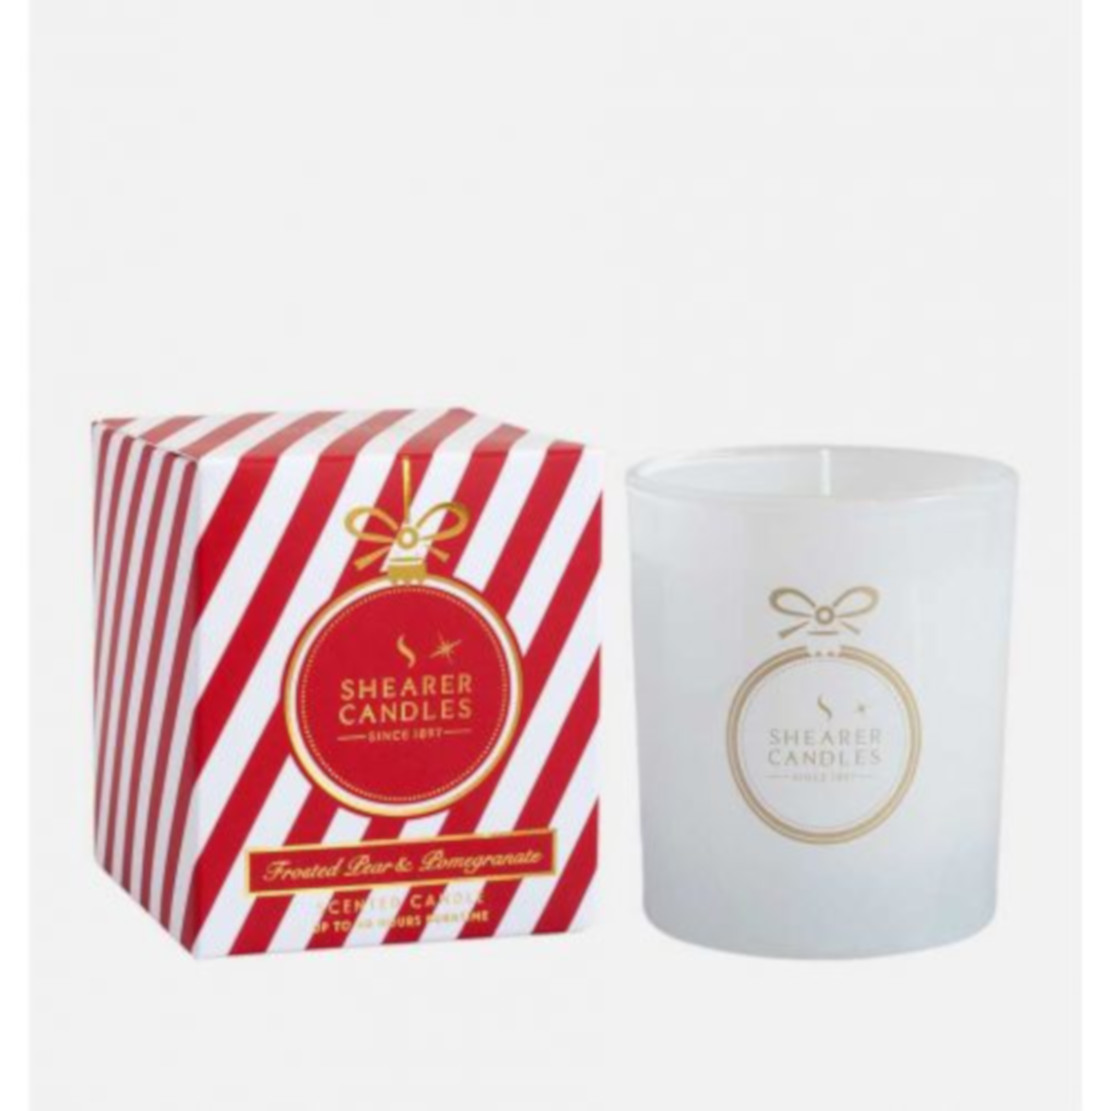 Shearer Frosted Pear and Pomegranate 30cl candle.